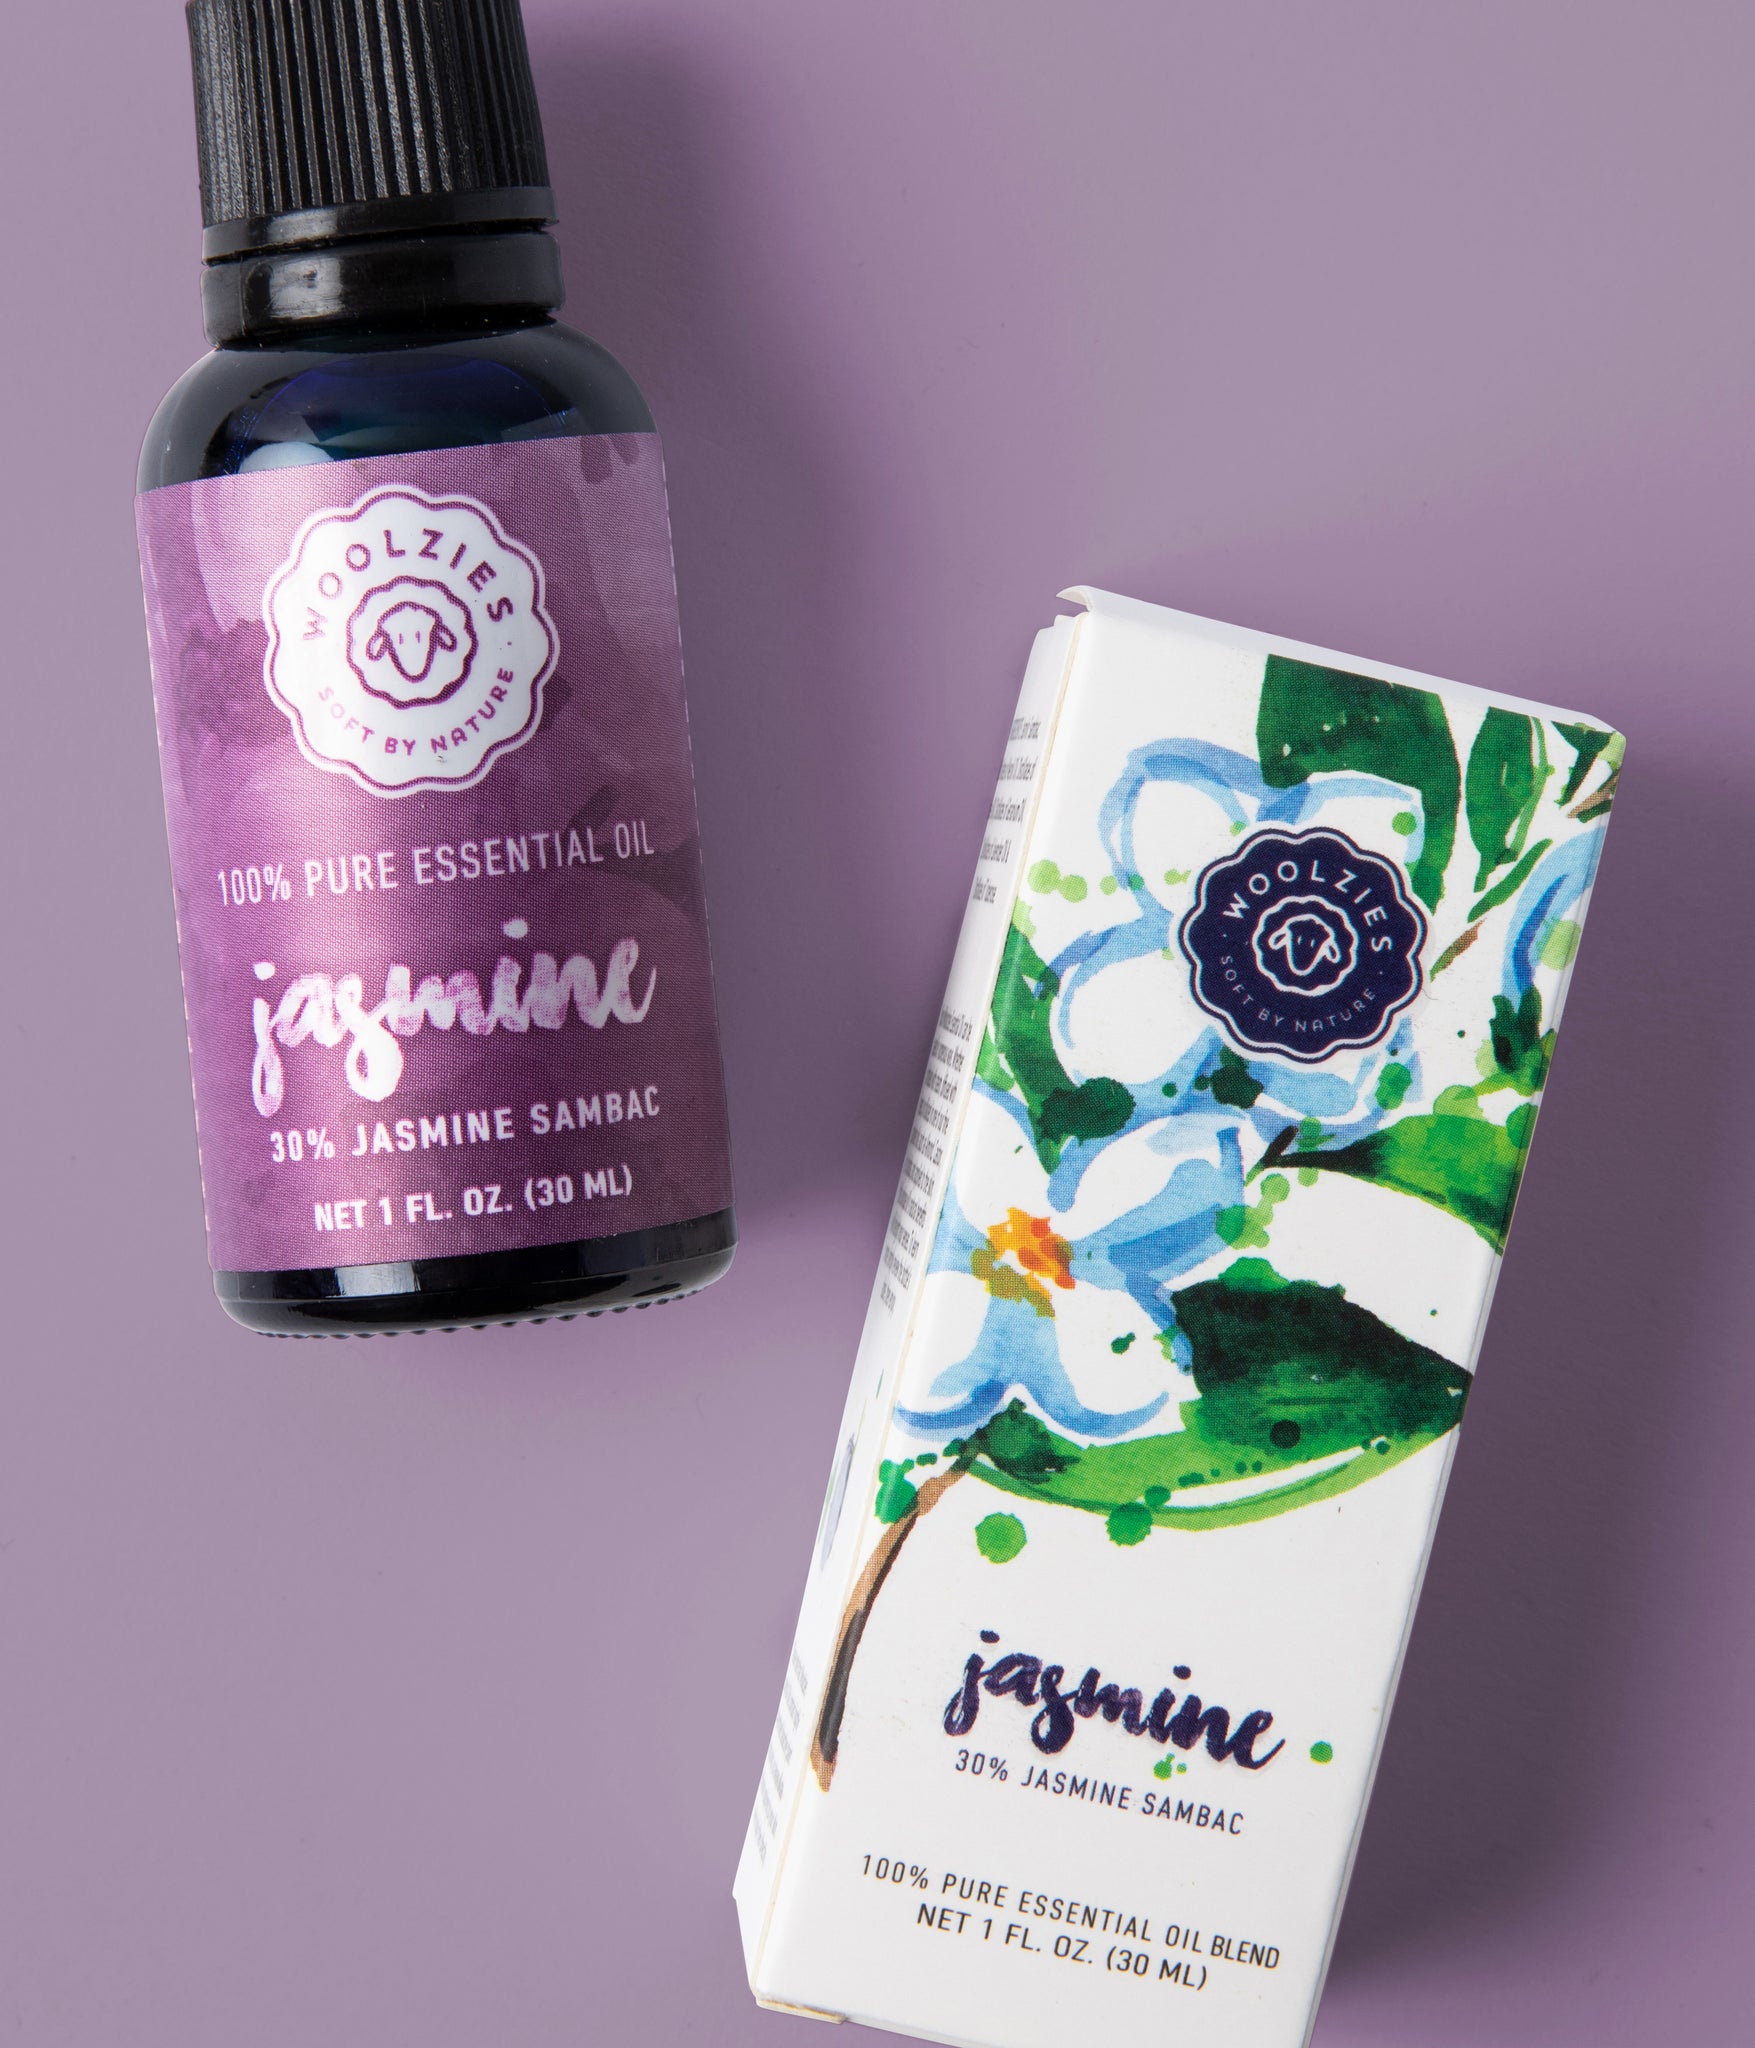 Woolzies Jasmine Essential Oil Blend 4 fl Oz| Natural Therapeutic Grade | for Diffusion/Internal/Topical